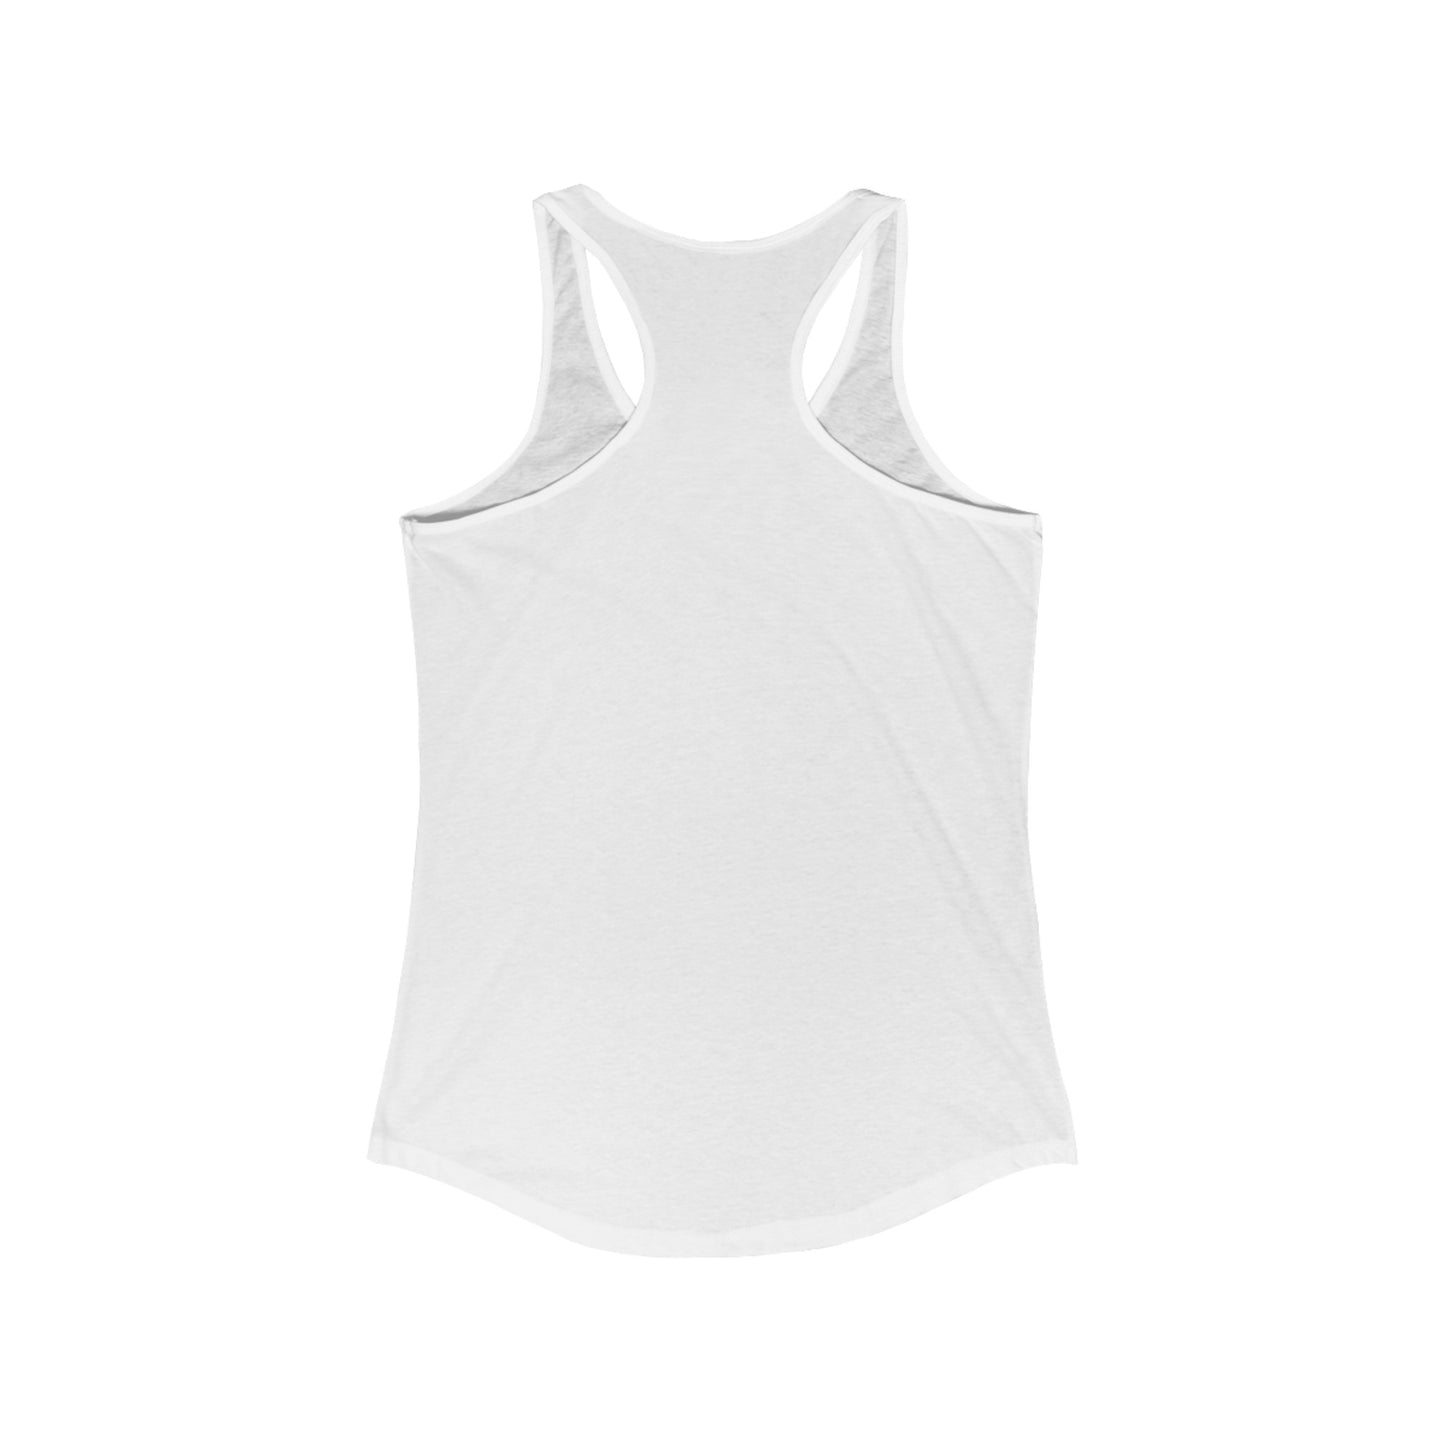 Back View of Lane Studio I'm As Flexible As My Morals Graphic Solid White Racerback Tank-Top